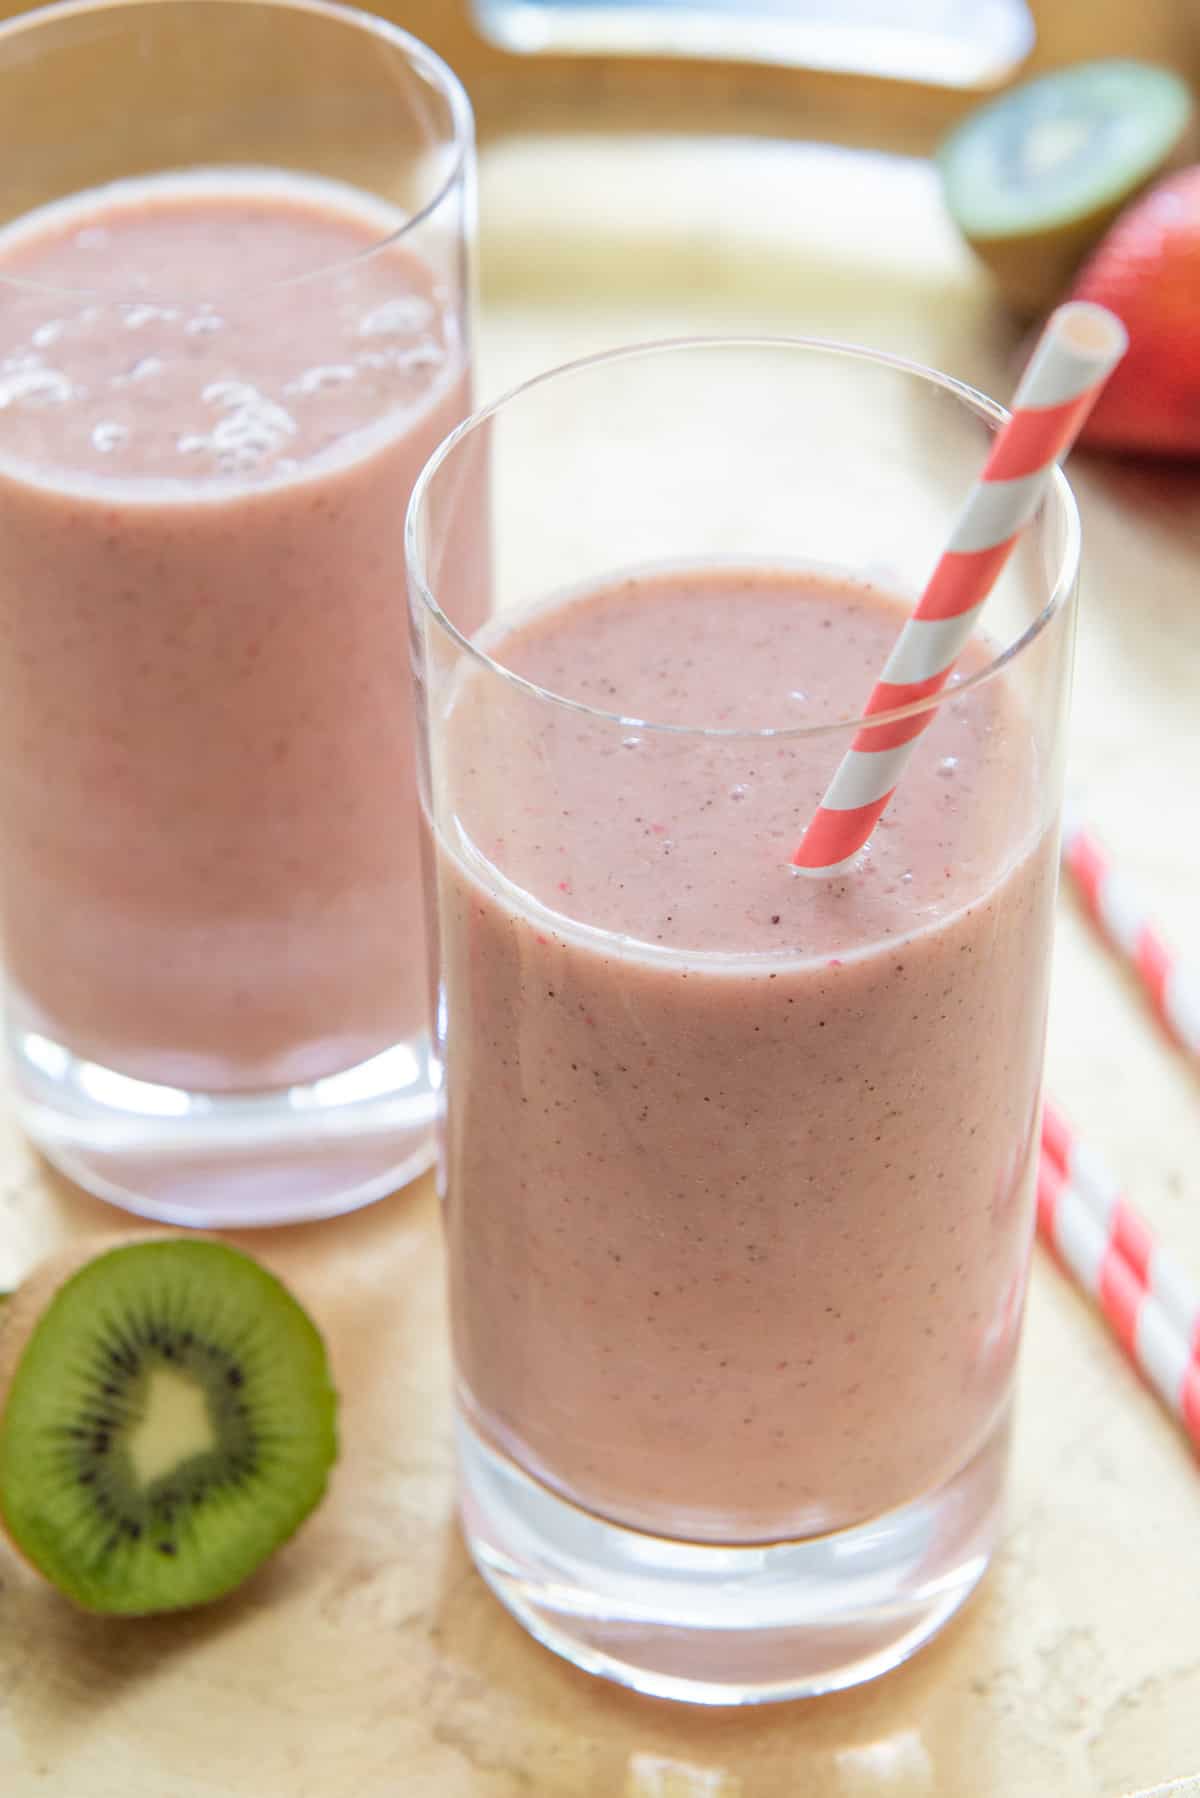 Strawberry Kiwi Smoothie Recipe in Tall Glasses with Paper Straw